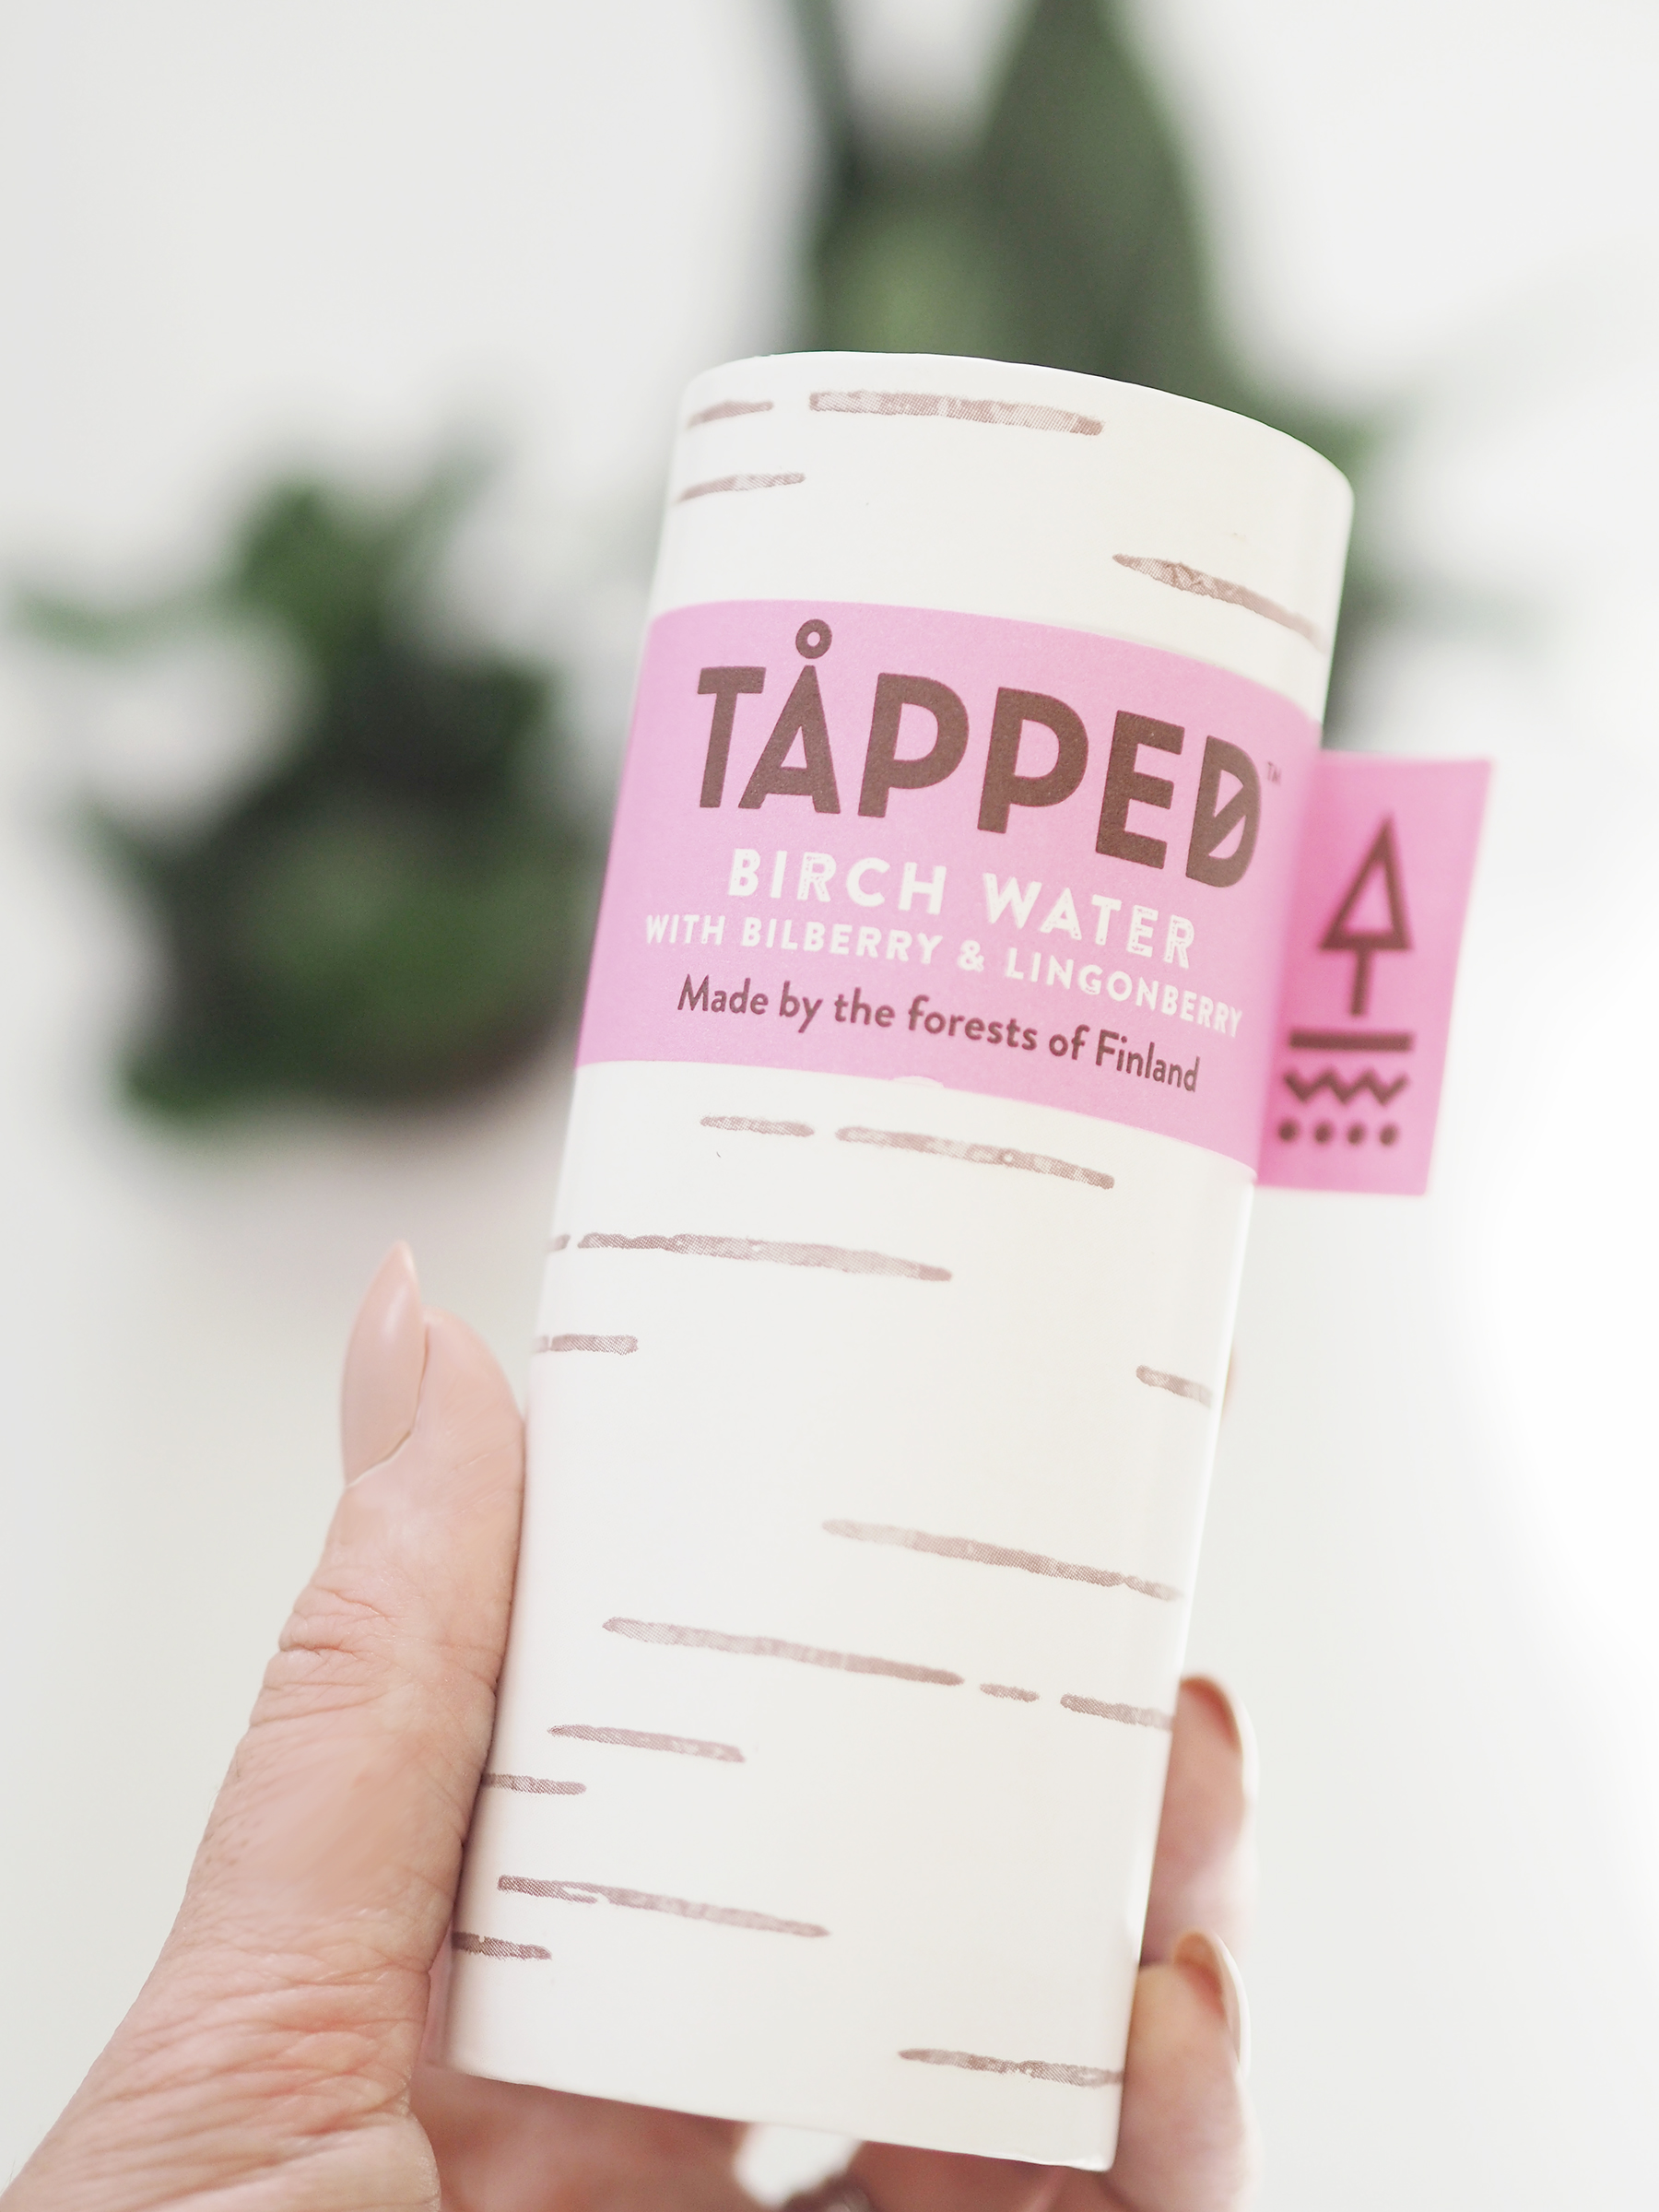 tapped birch water